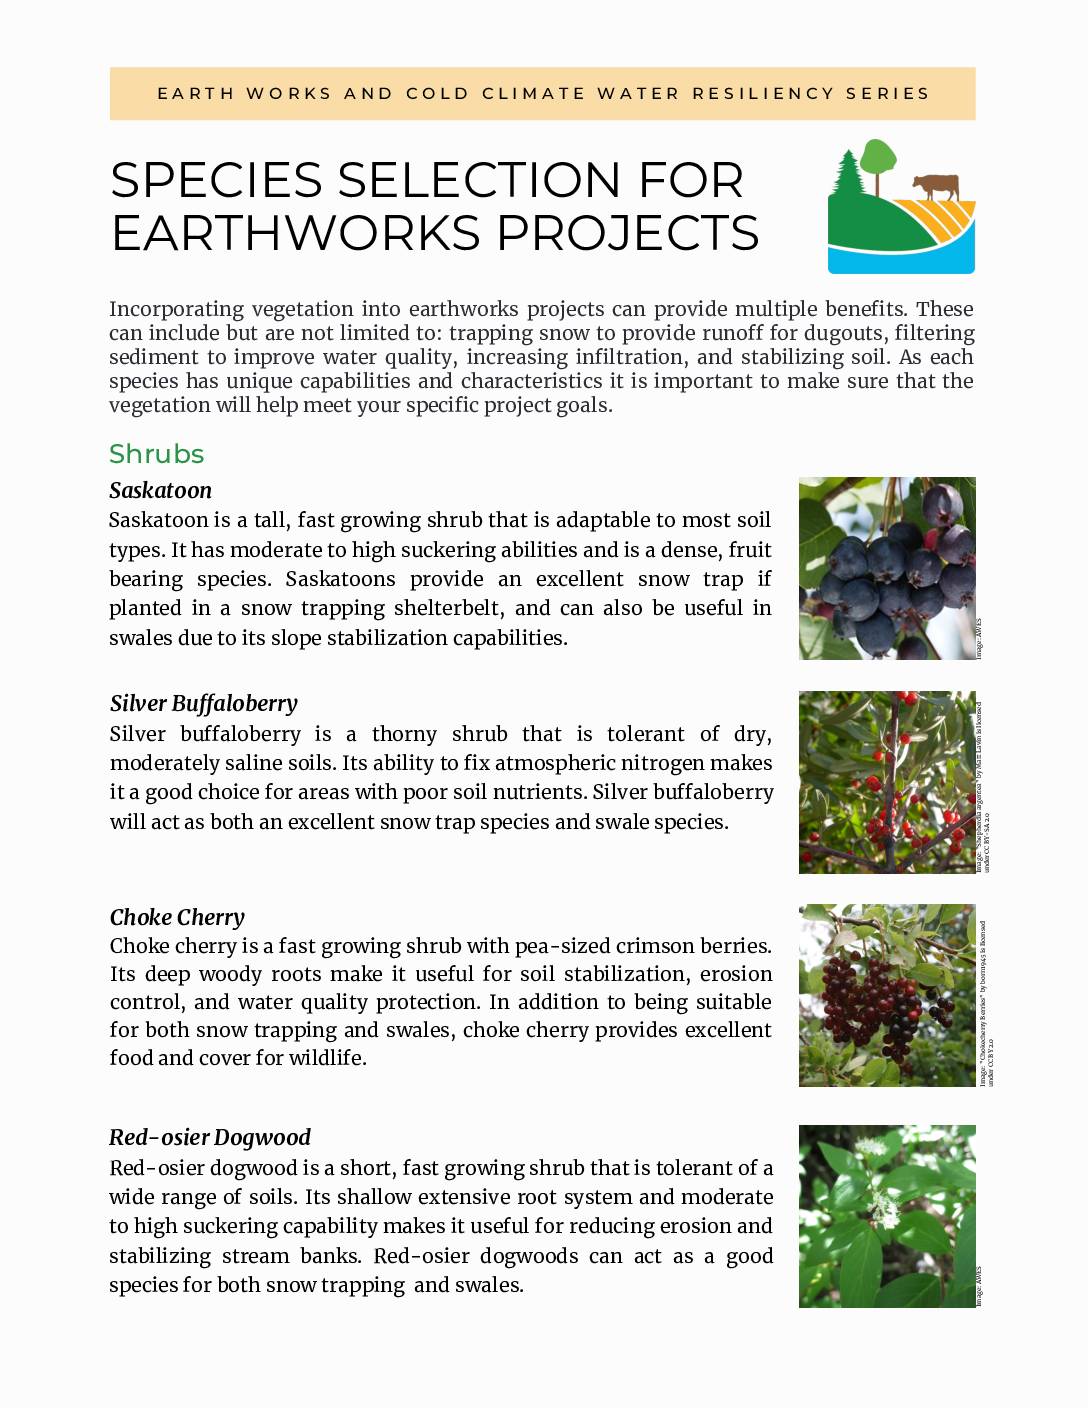 Species Selection for Earthworks Projects